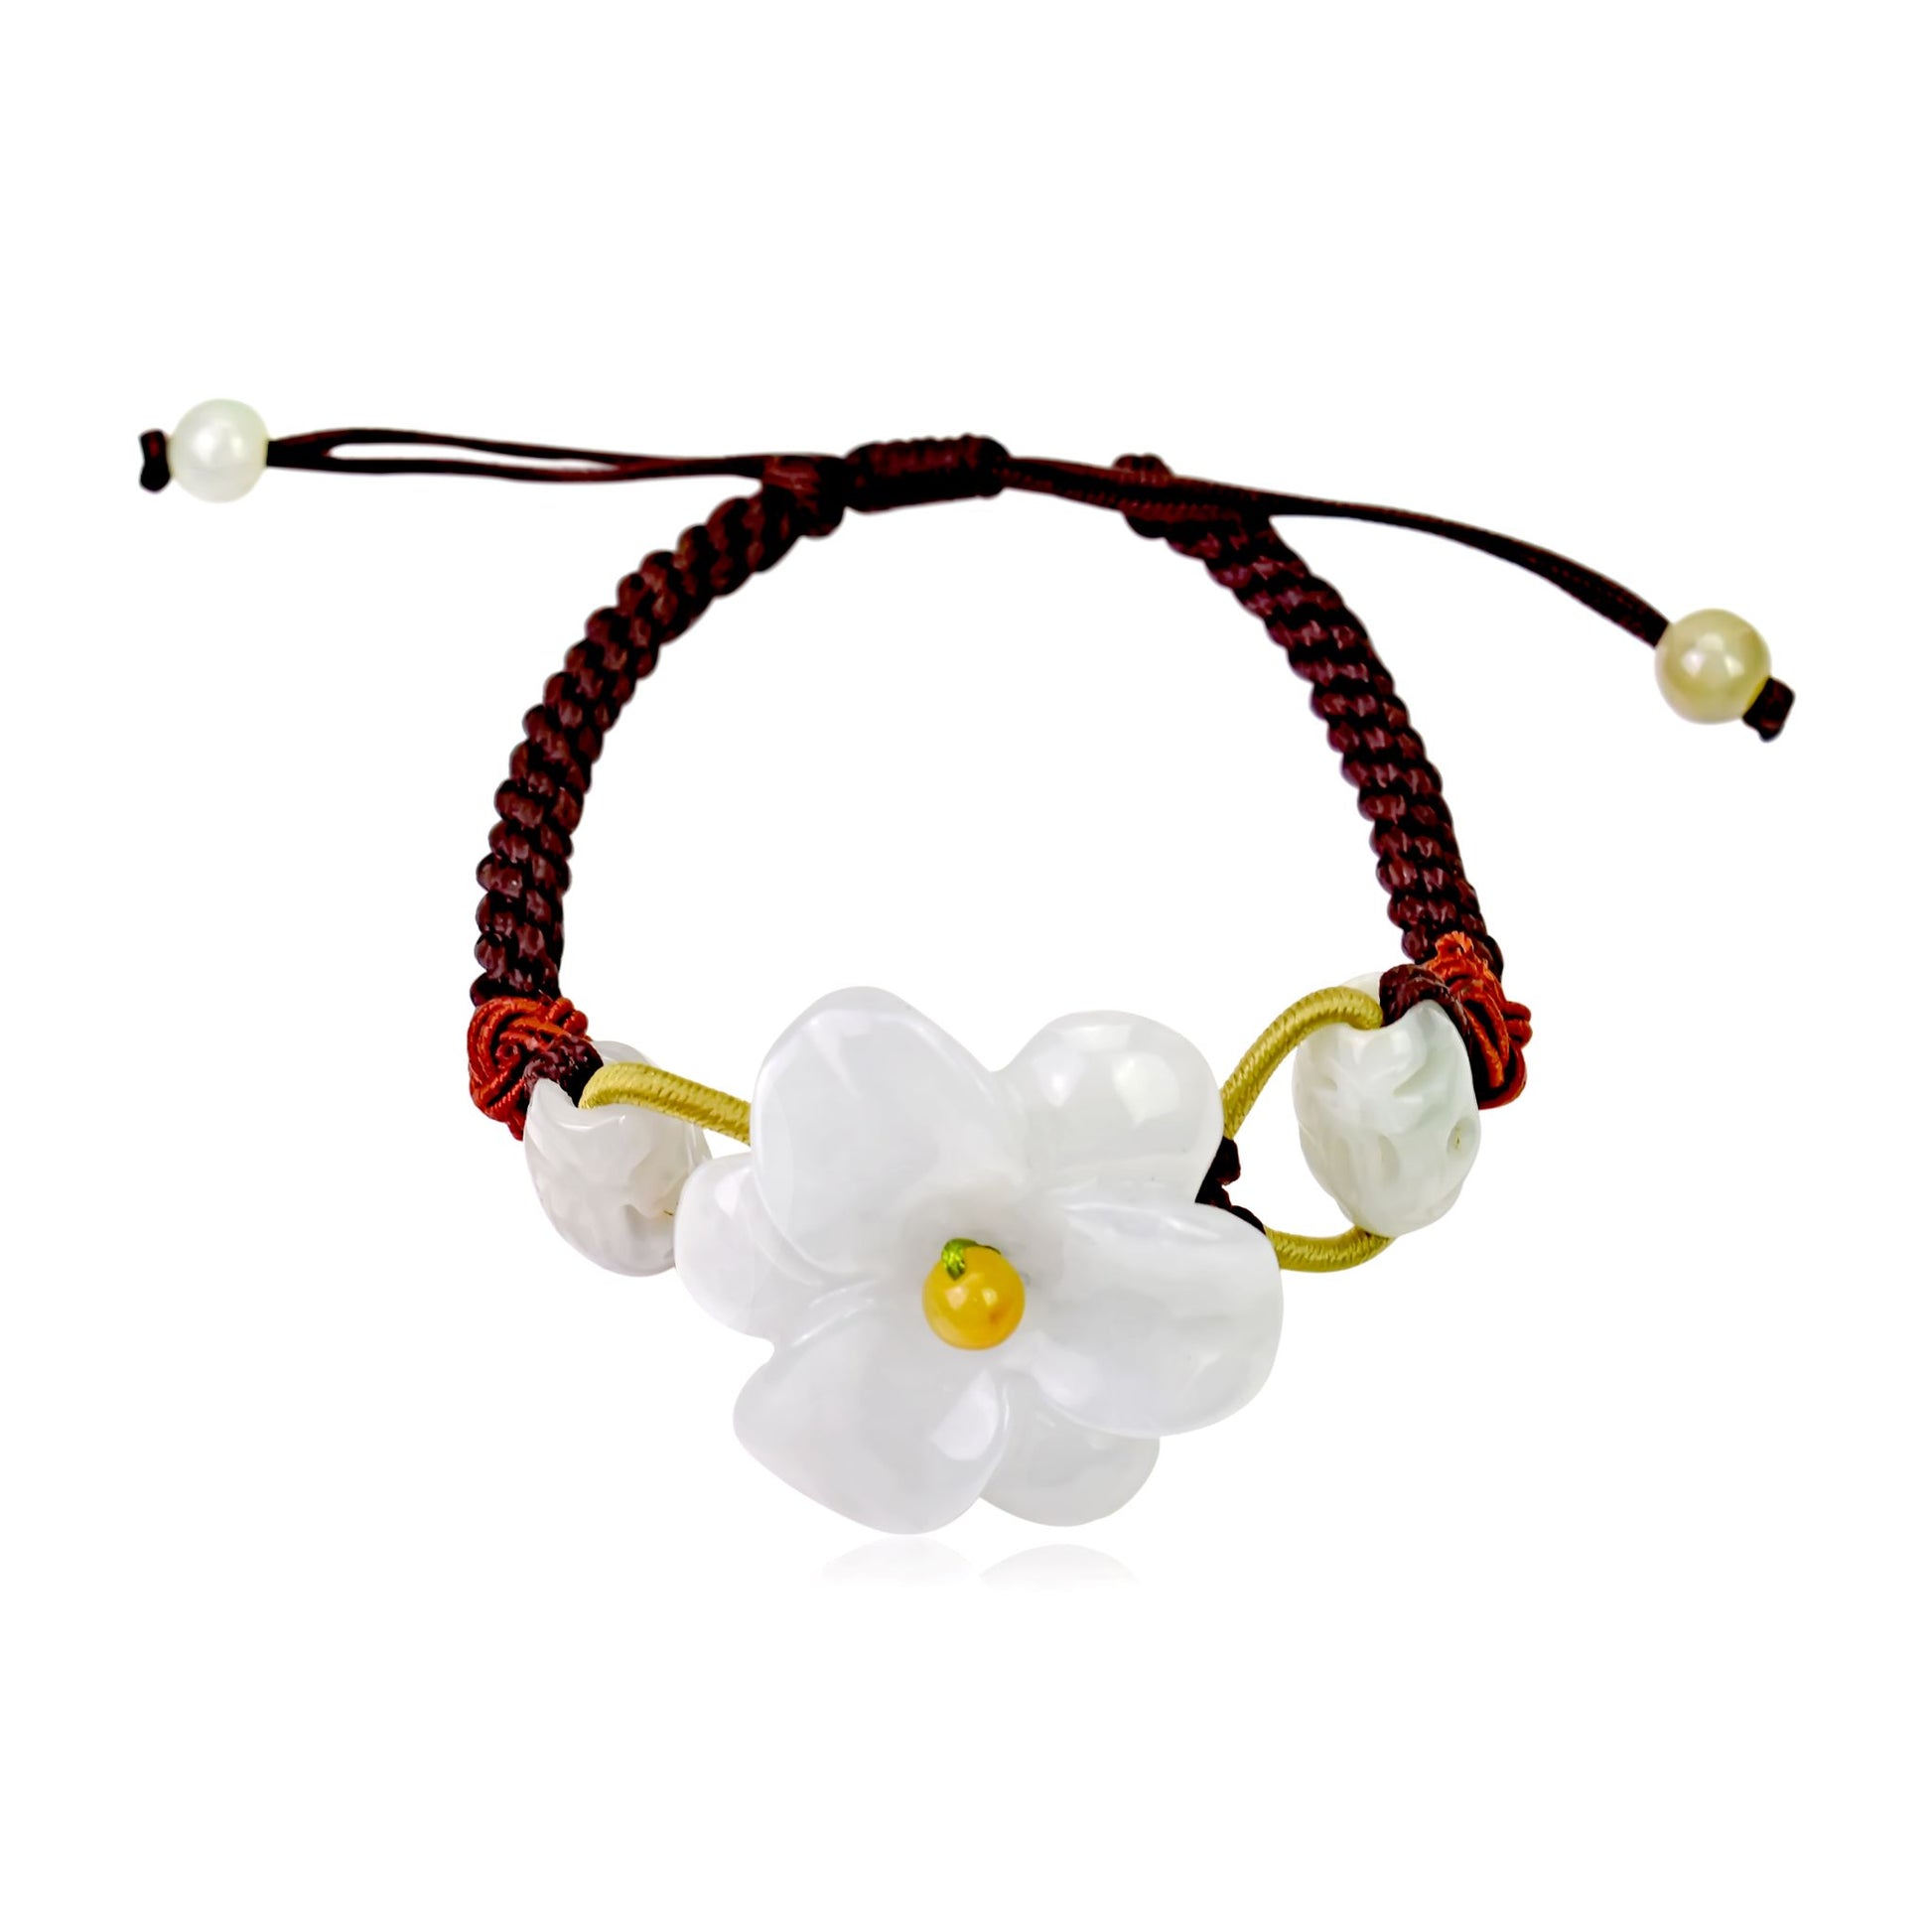 Show Off Your Unique Style with the Amaryllis Jade Bracelet made with Brown Cord